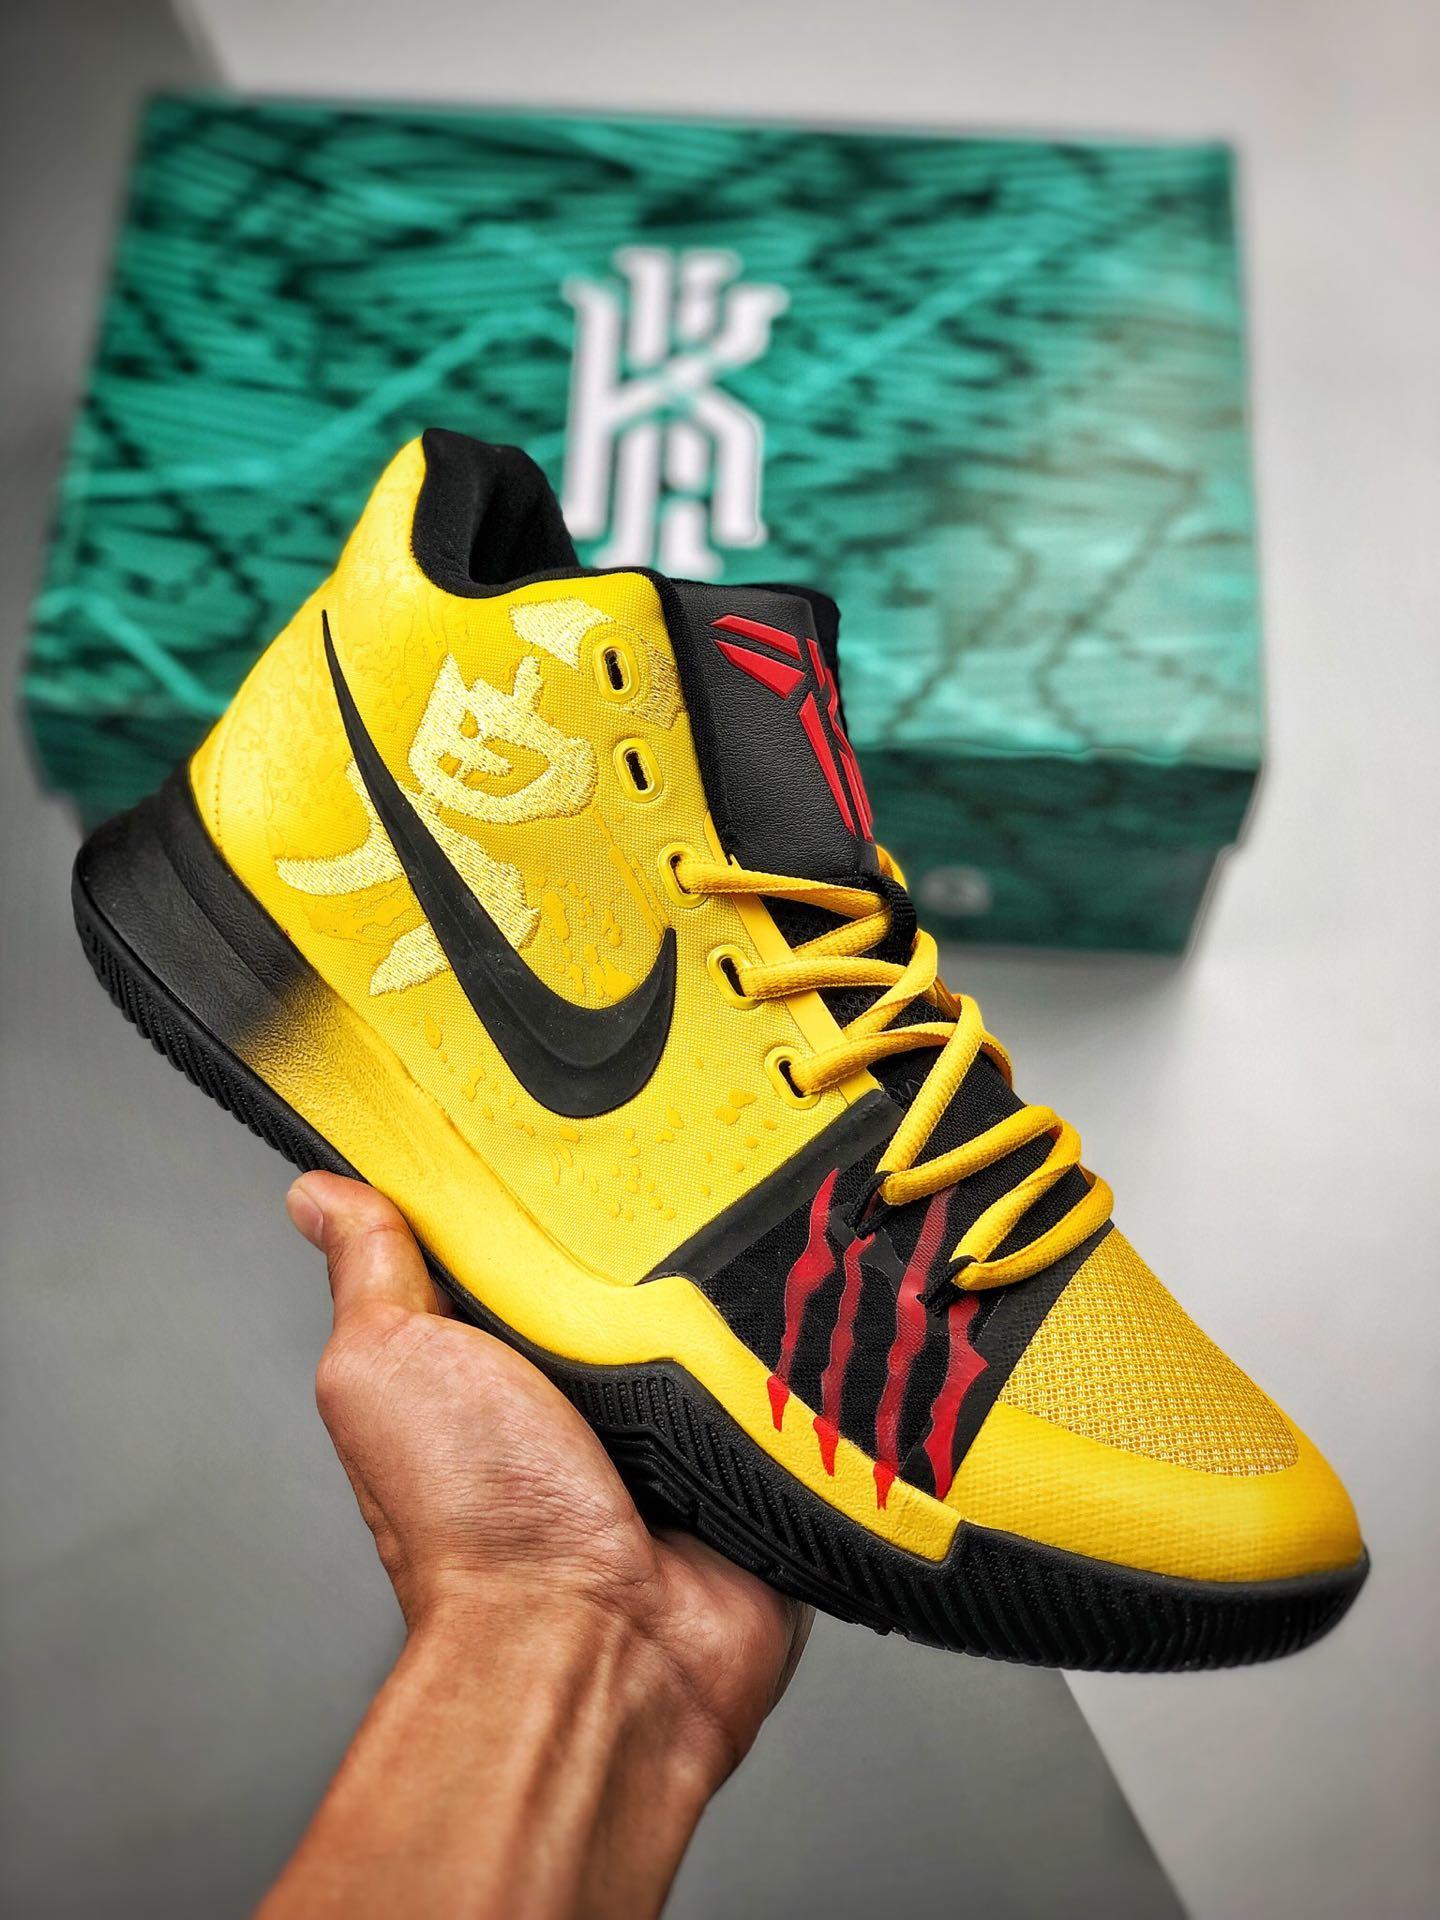 kyrie 3 bruce lee for sale